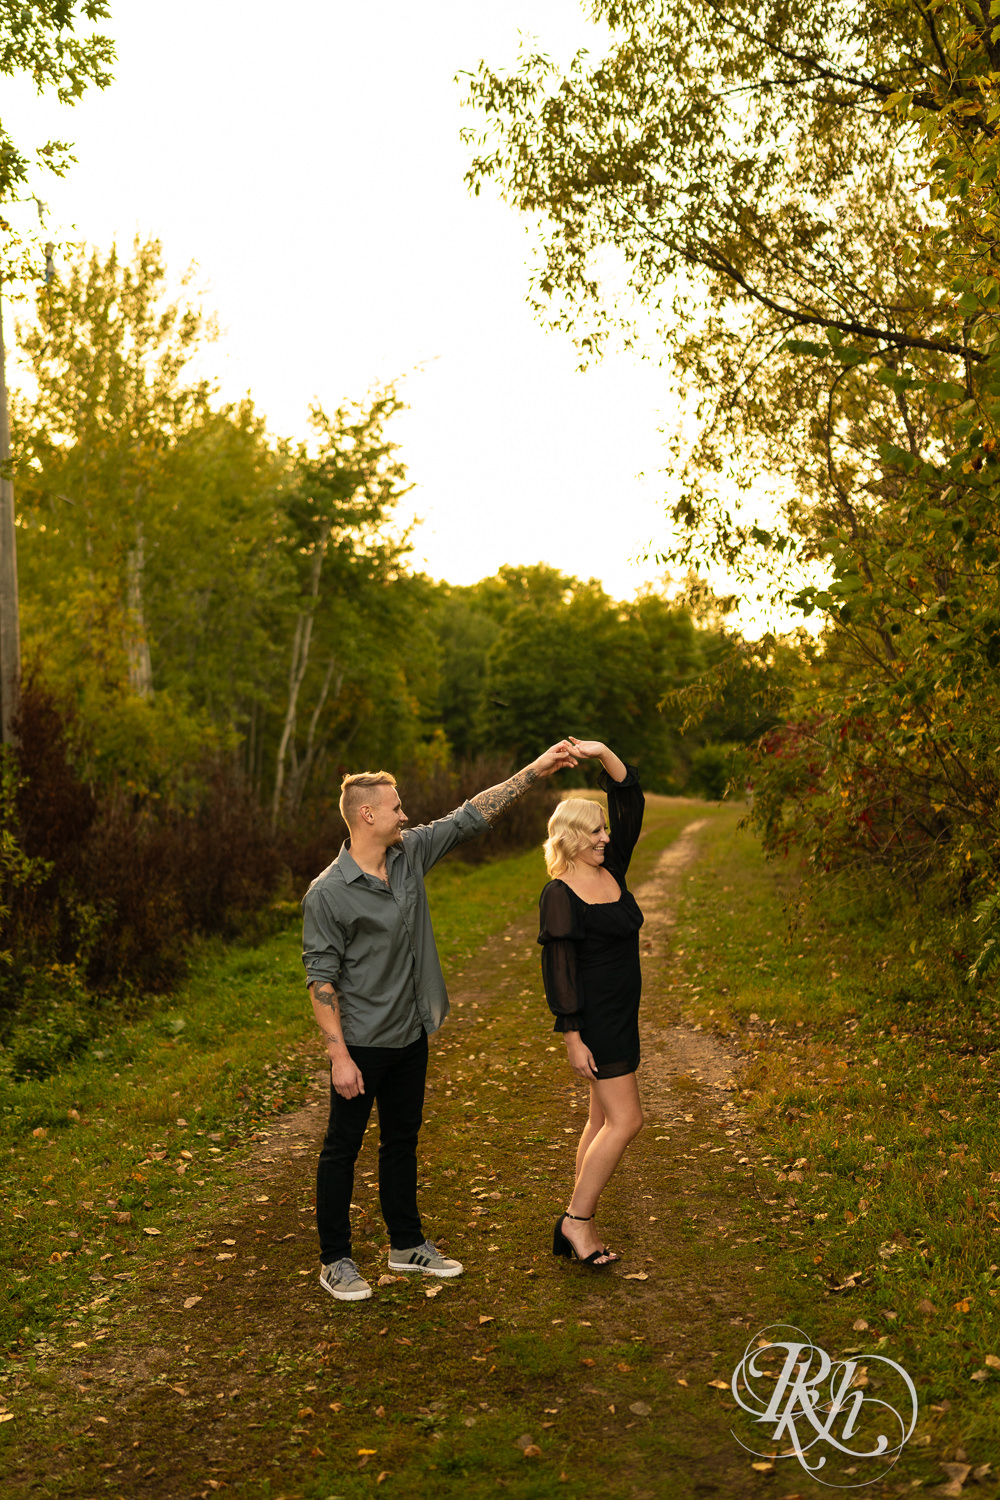 Blond woman in black dress and man in dress shirt damce during sunset engagement photos at Lebanon Hills Regional Park in Eagan, Minnesota.